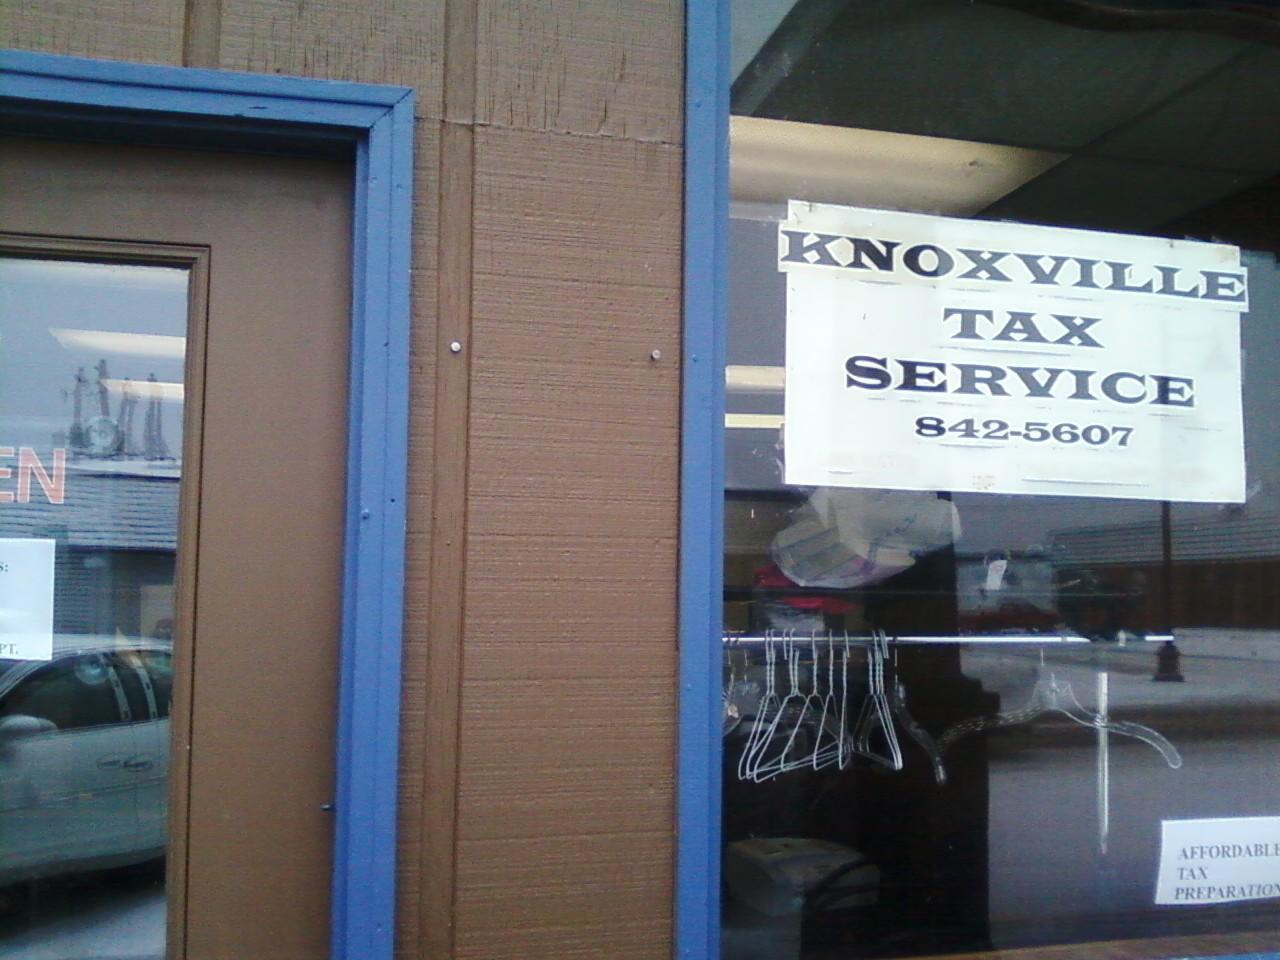 Knoxville Tax Services 310 W Robinson St, Knoxville Iowa 50138